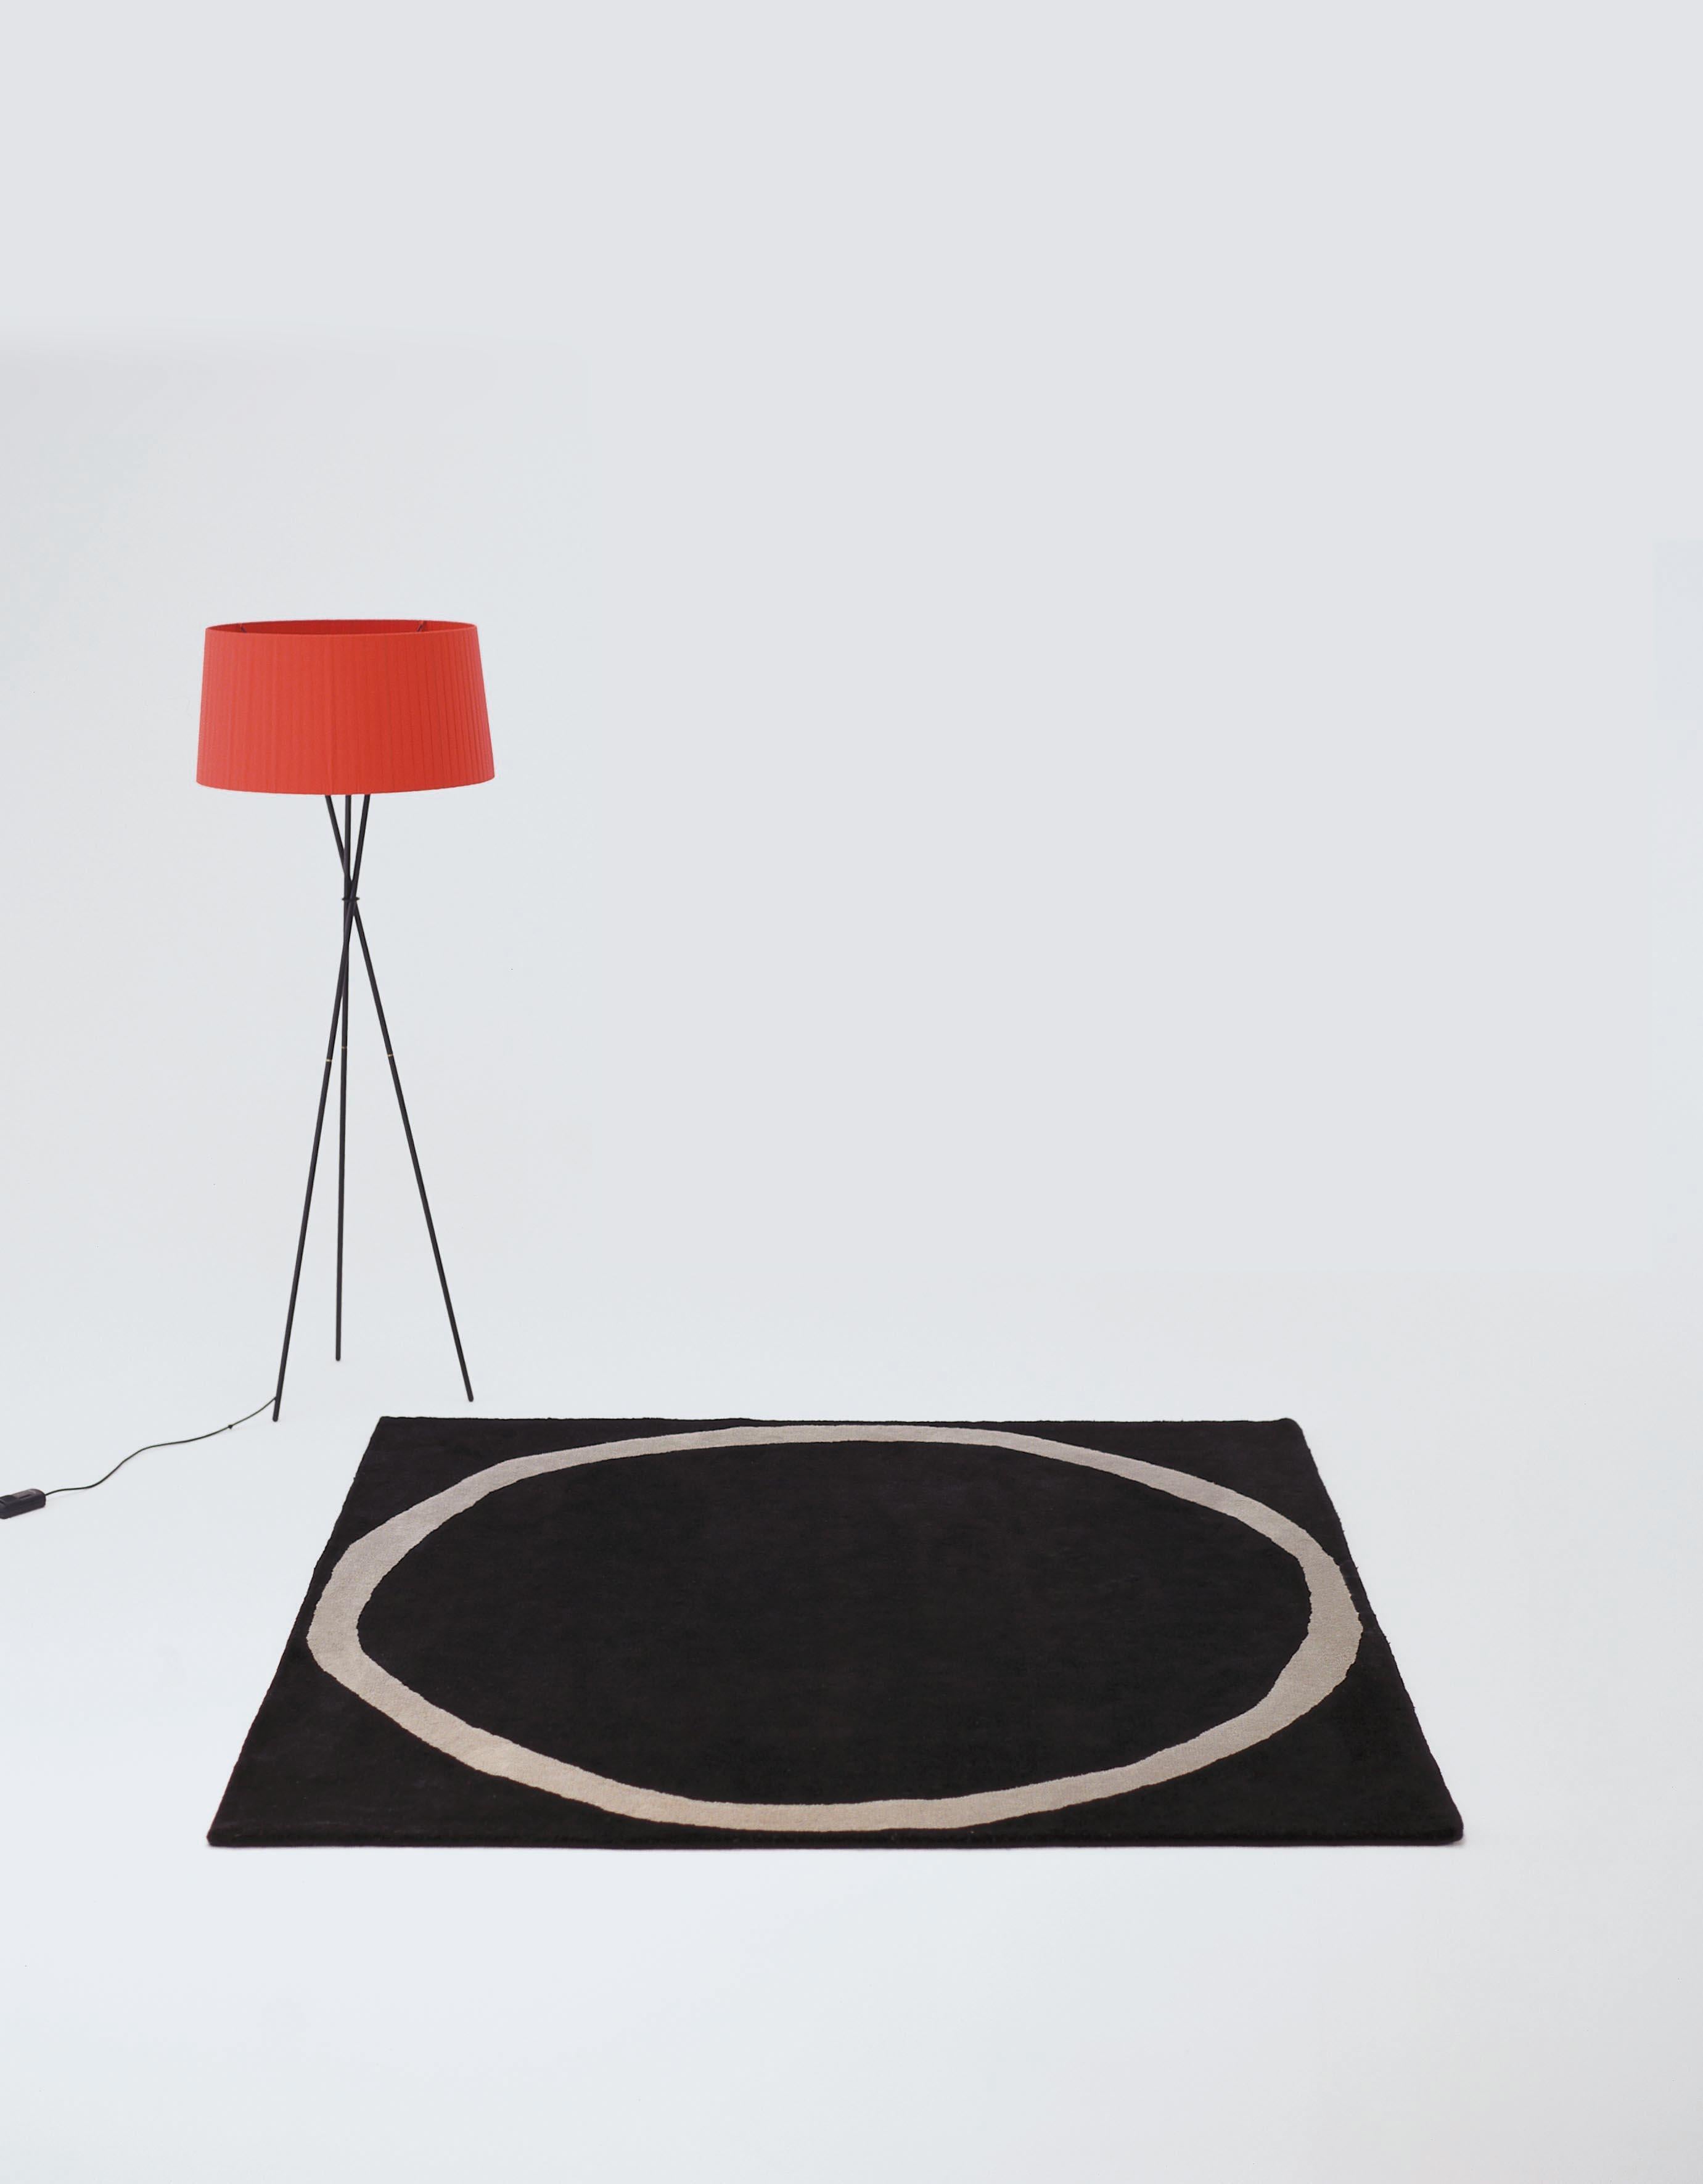 Almost perfect, almost serene, almost discreet and indiscreet, almost happy. The simplicity of an irregular outline defines the form of each Aros rug.

Comprised of three circular models in contrasting colors and two different sizes, and a square